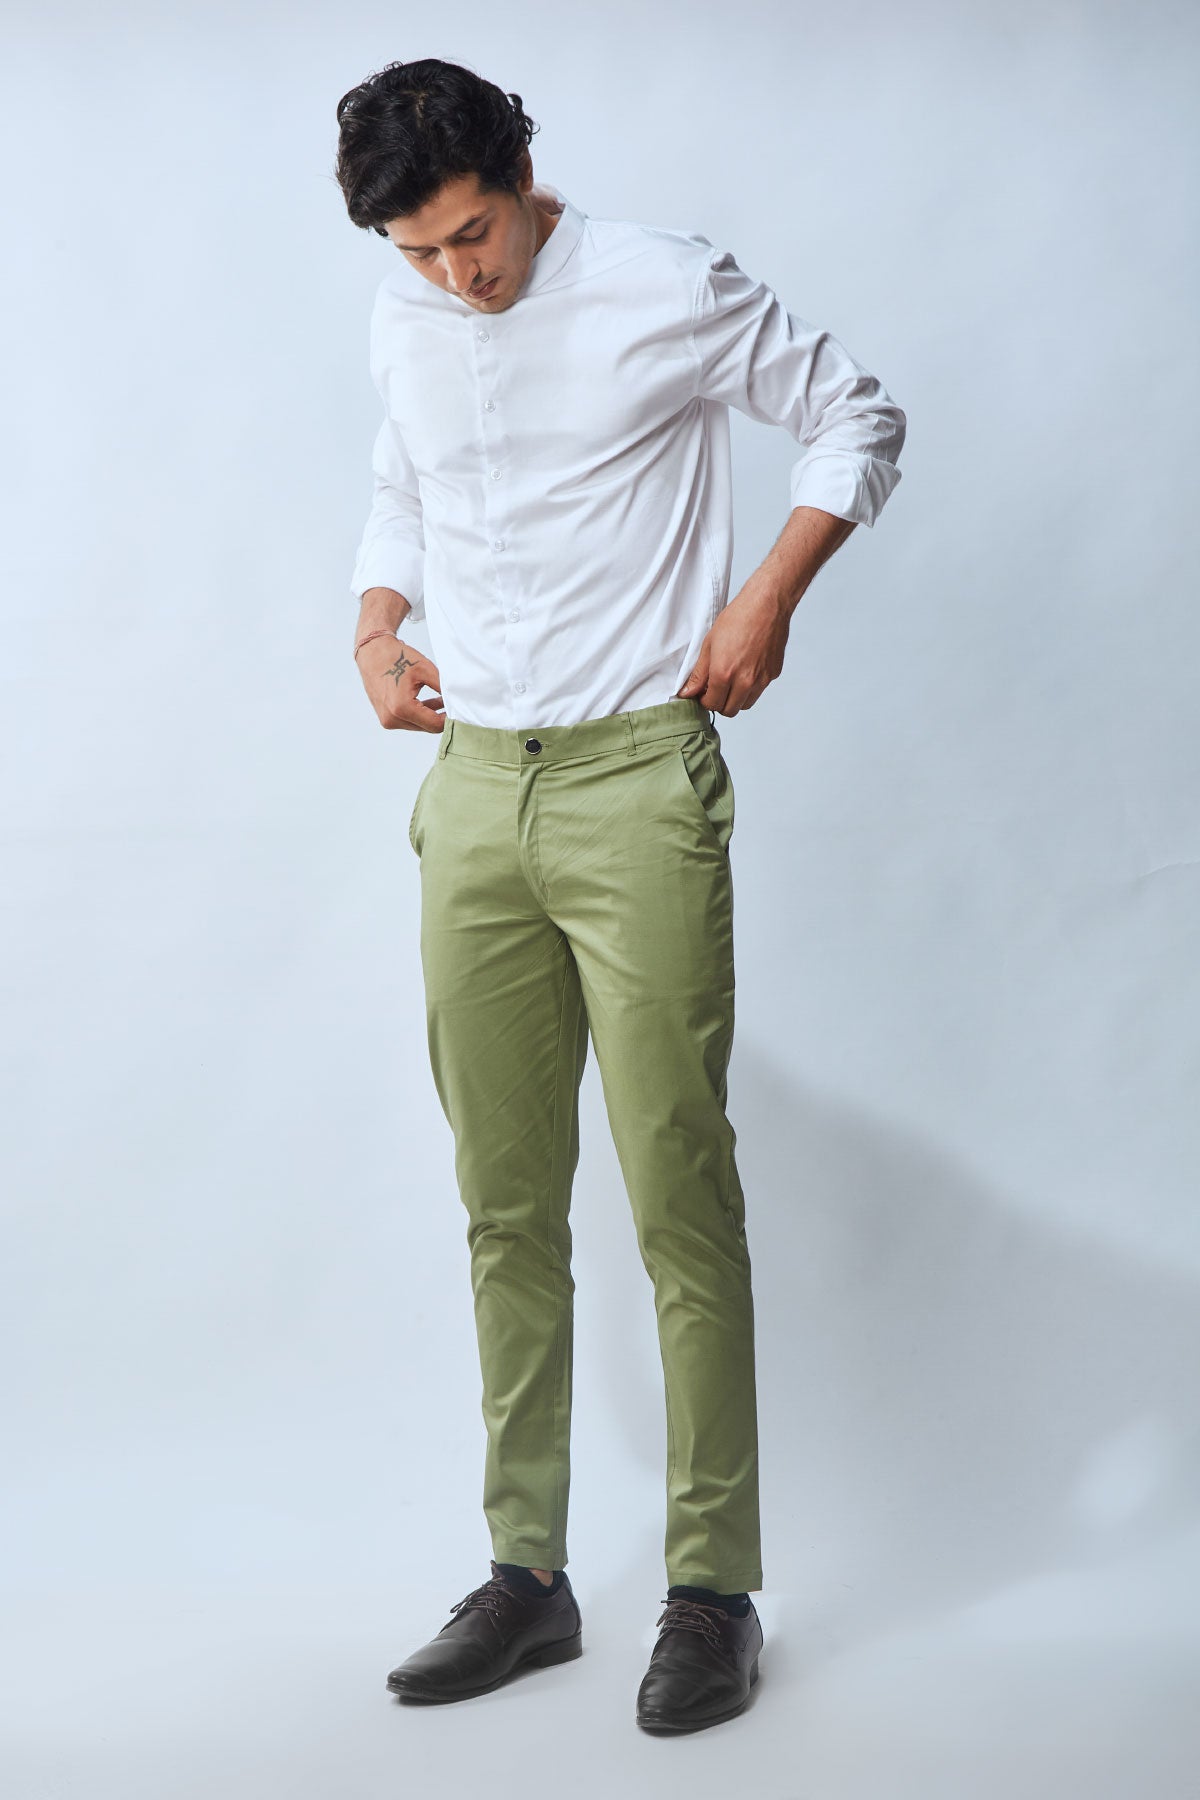 Light Green Pant Color Combination Ideas For Men || #lightgreenpant Outfit  Ideas || by Look Stylish - YouTube